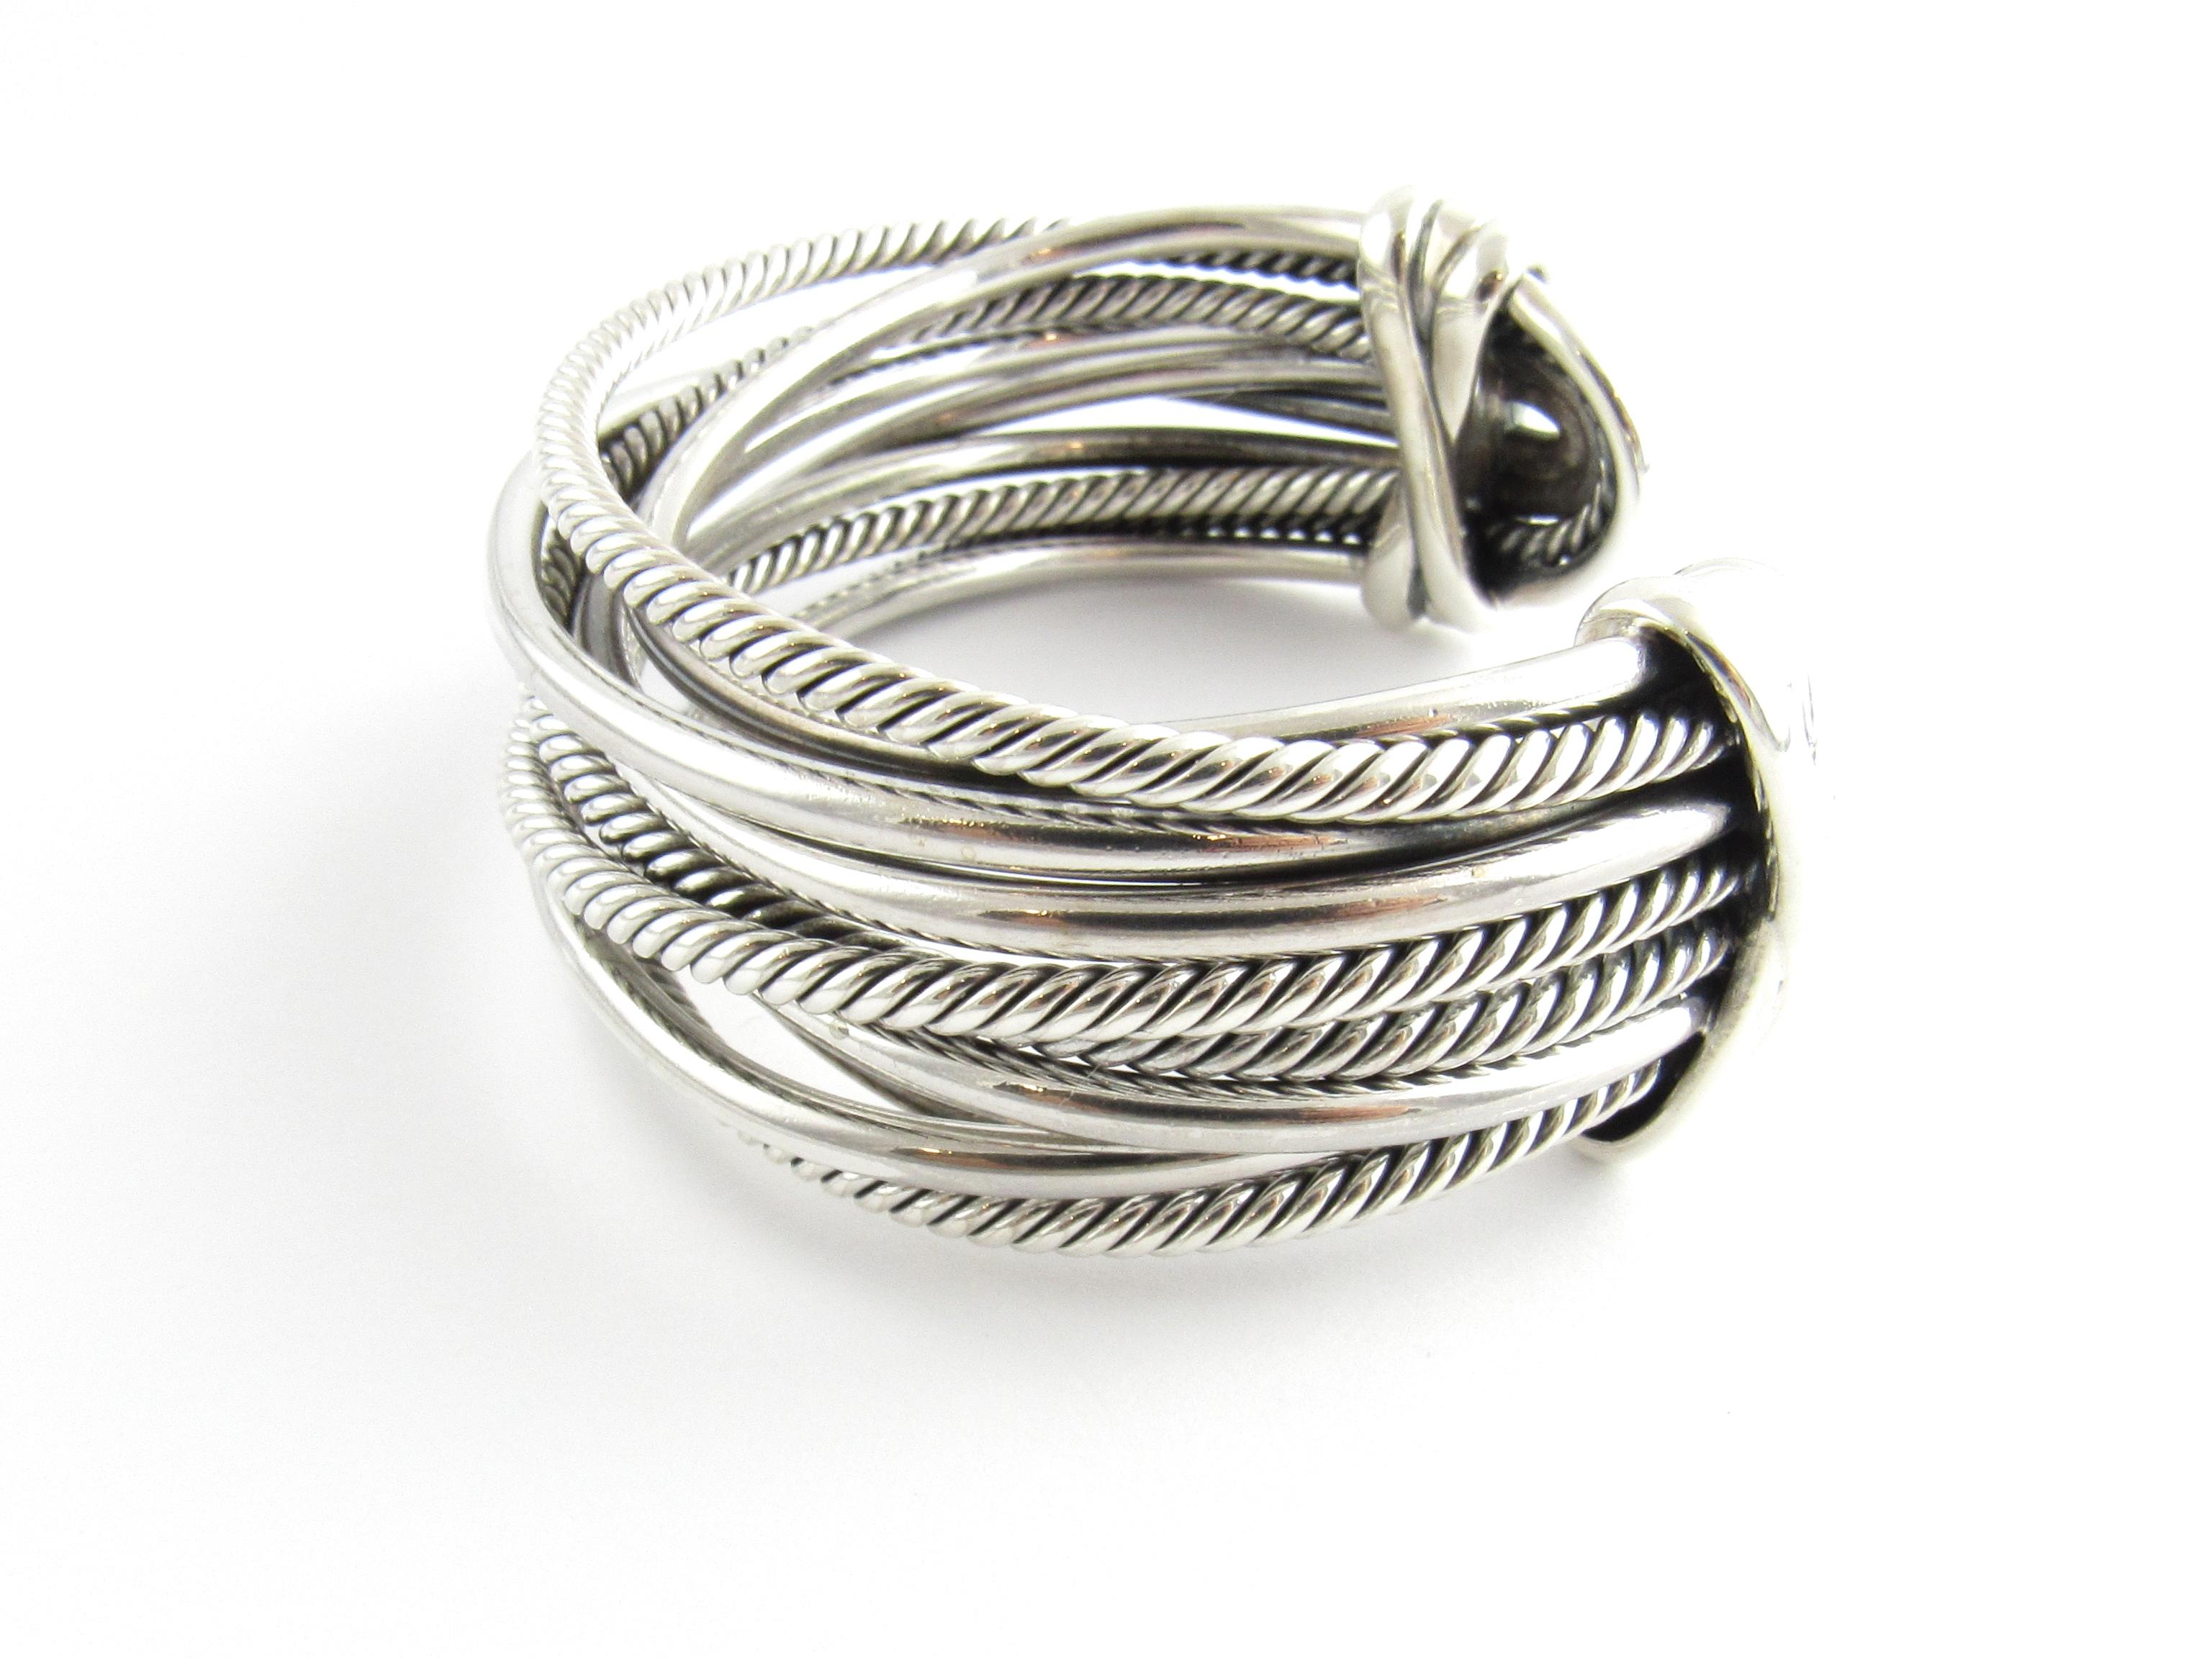 David Yurman Sterling Silver Crossover Cable Wide Cuff Bracelet

This authentic David Yurman bracelet is approx. 25mm wide

Circumference around inside including gap is approx. 6